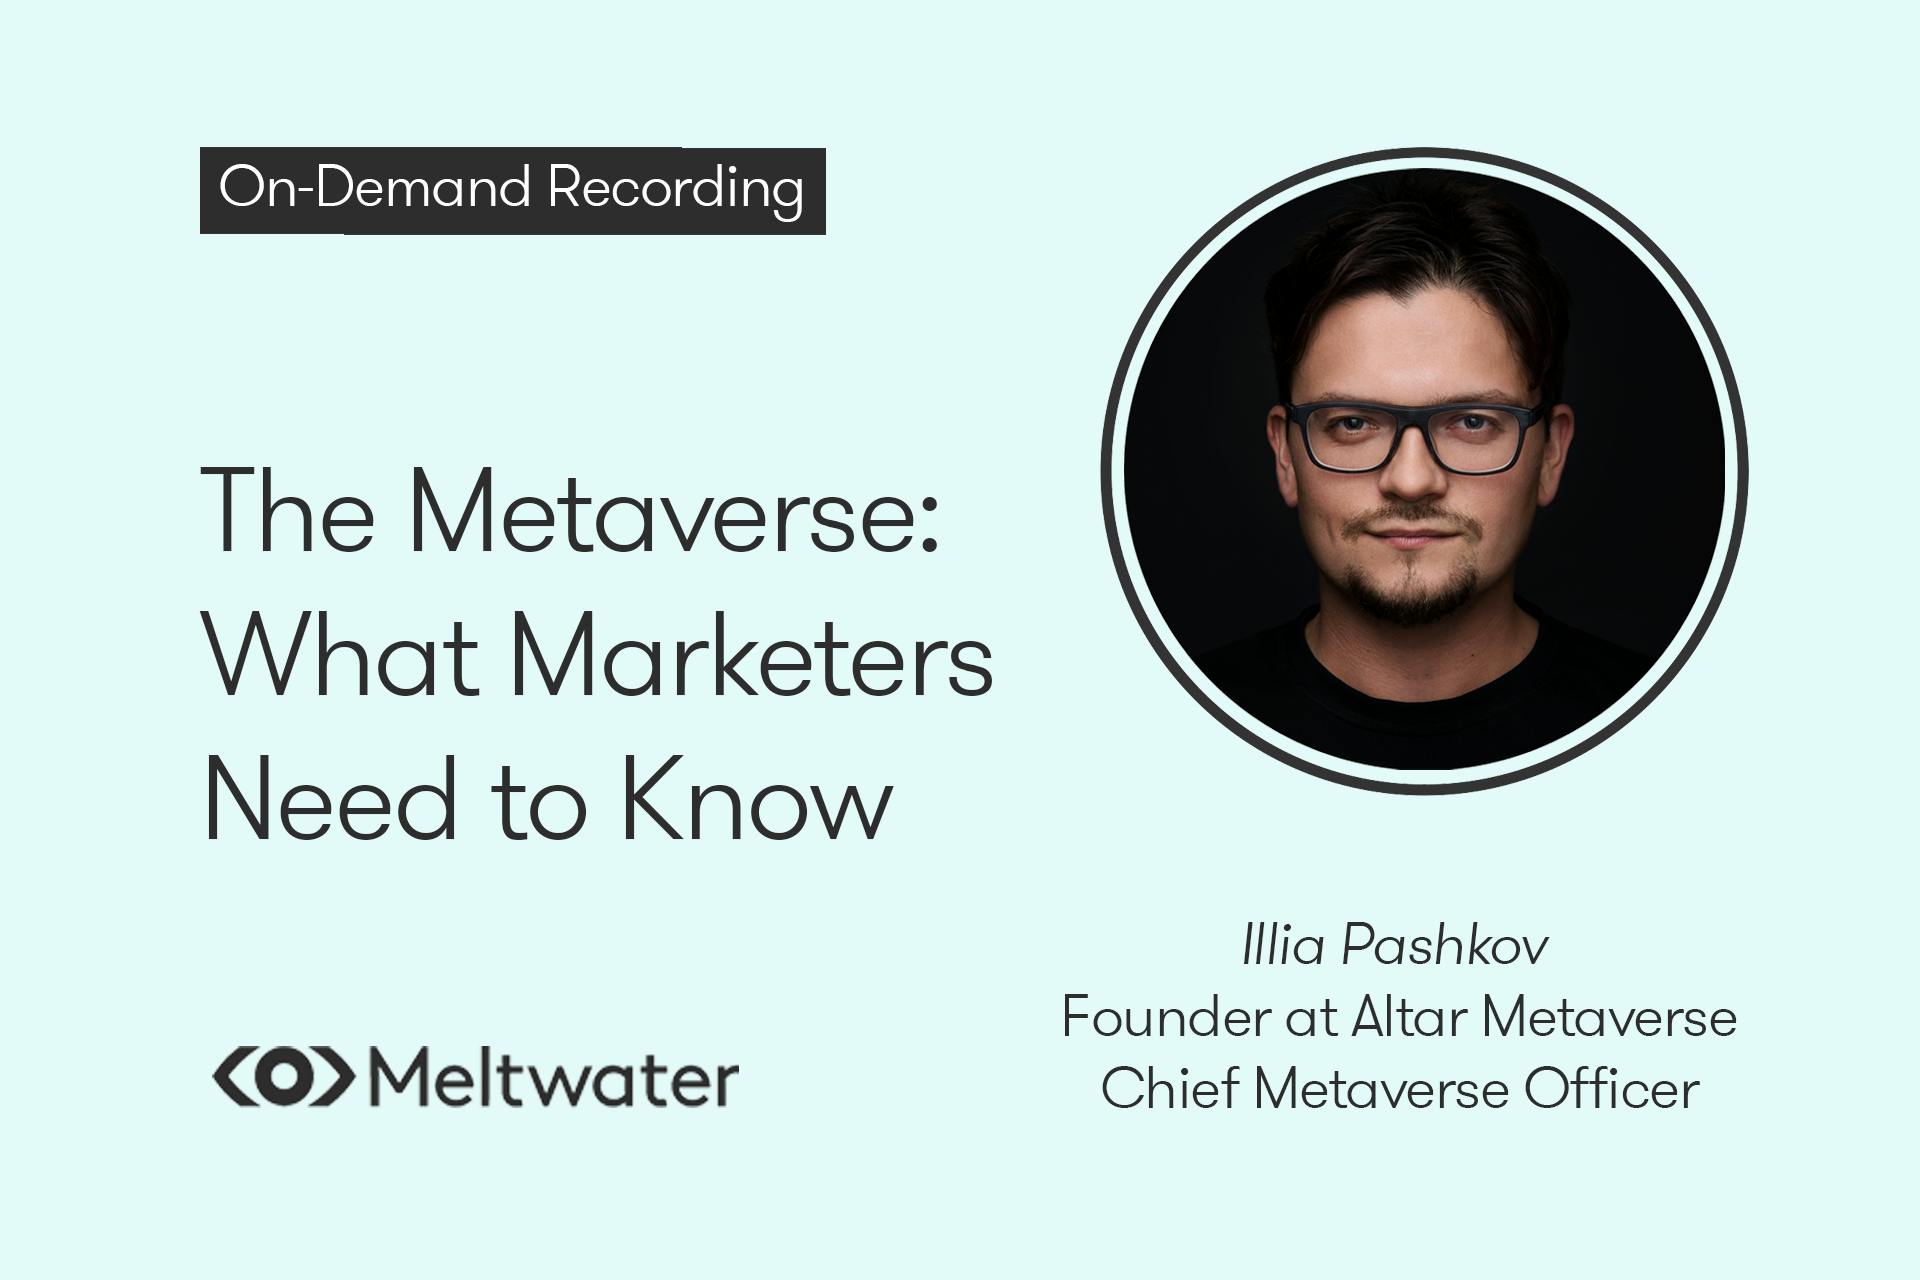 The Metaverse: What Marketers Need to Know (On Demand Recording) Meltwater Webinar